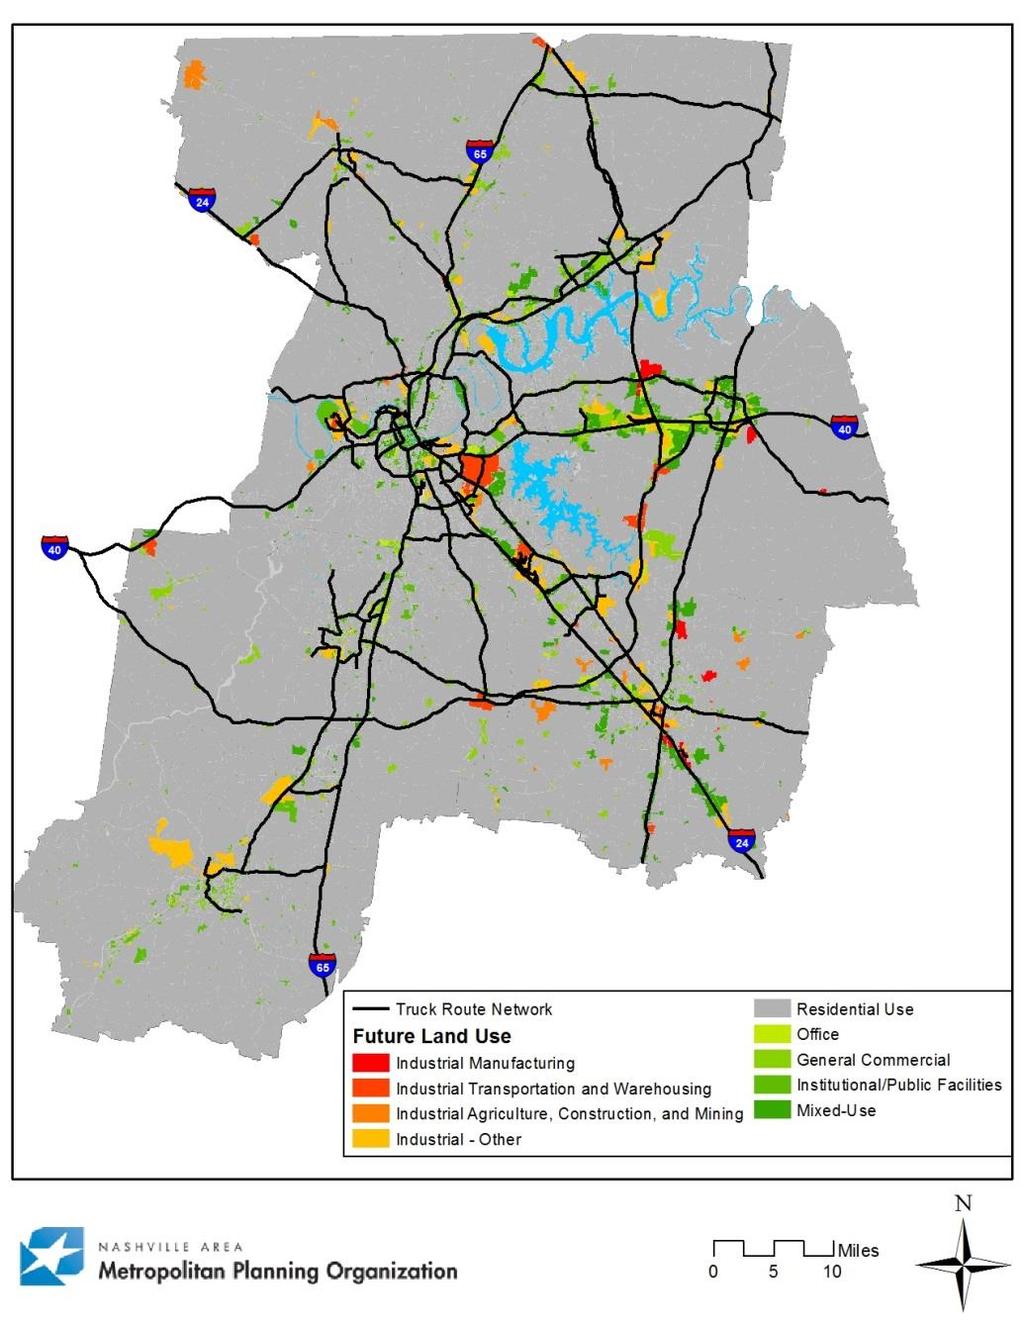 Truck Routes and Land Uses Truck route network provides access to all major